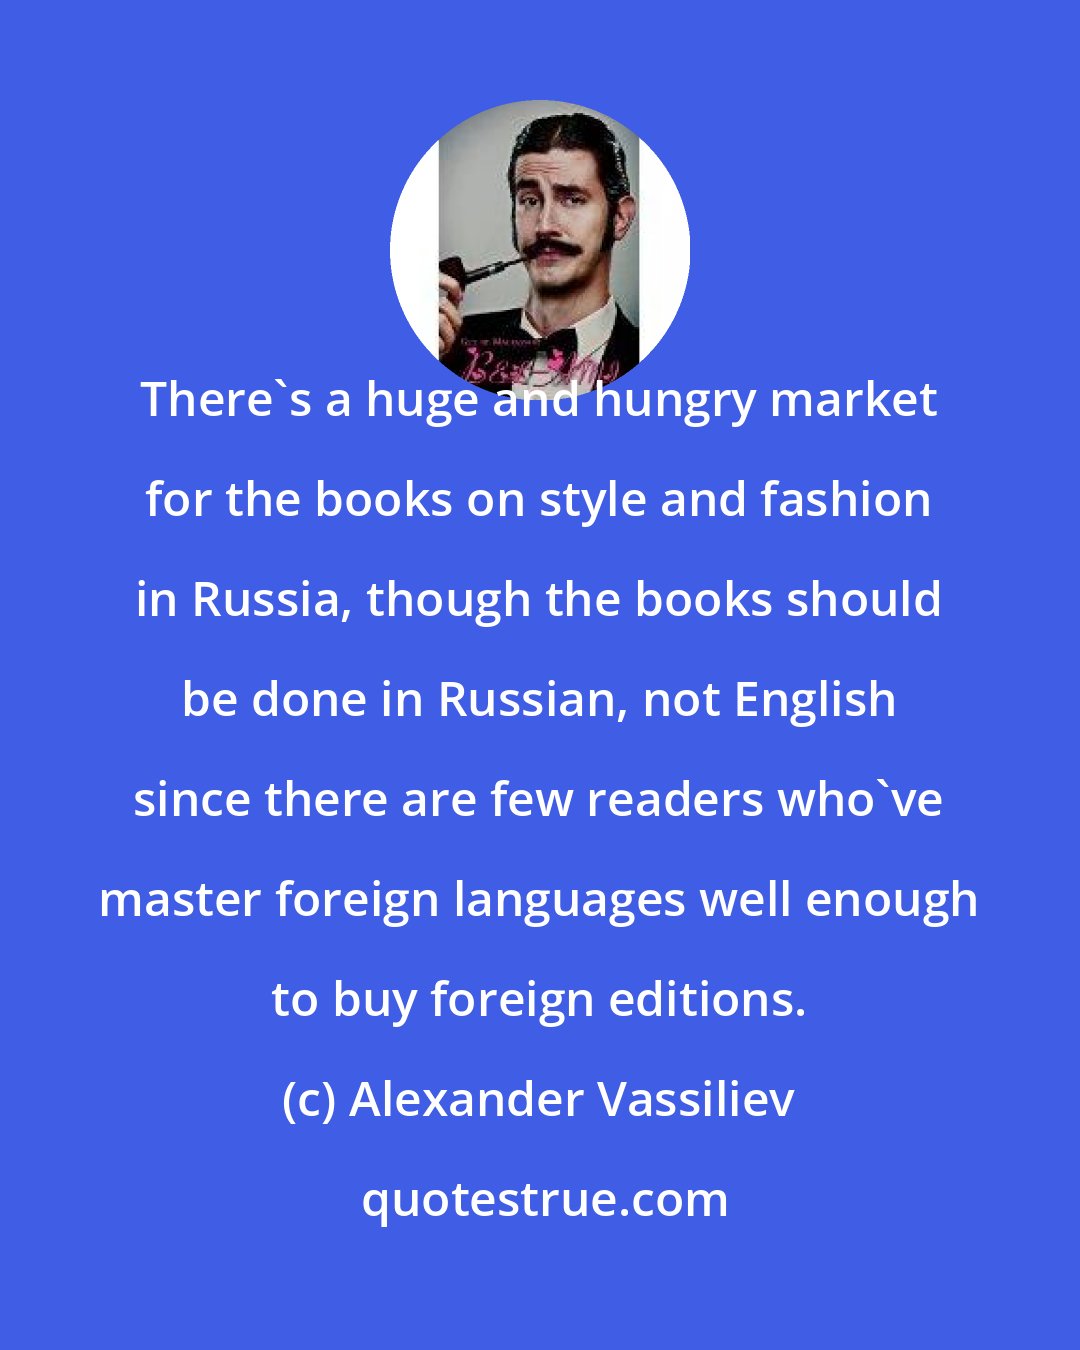 Alexander Vassiliev: There's a huge and hungry market for the books on style and fashion in Russia, though the books should be done in Russian, not English since there are few readers who've master foreign languages well enough to buy foreign editions.